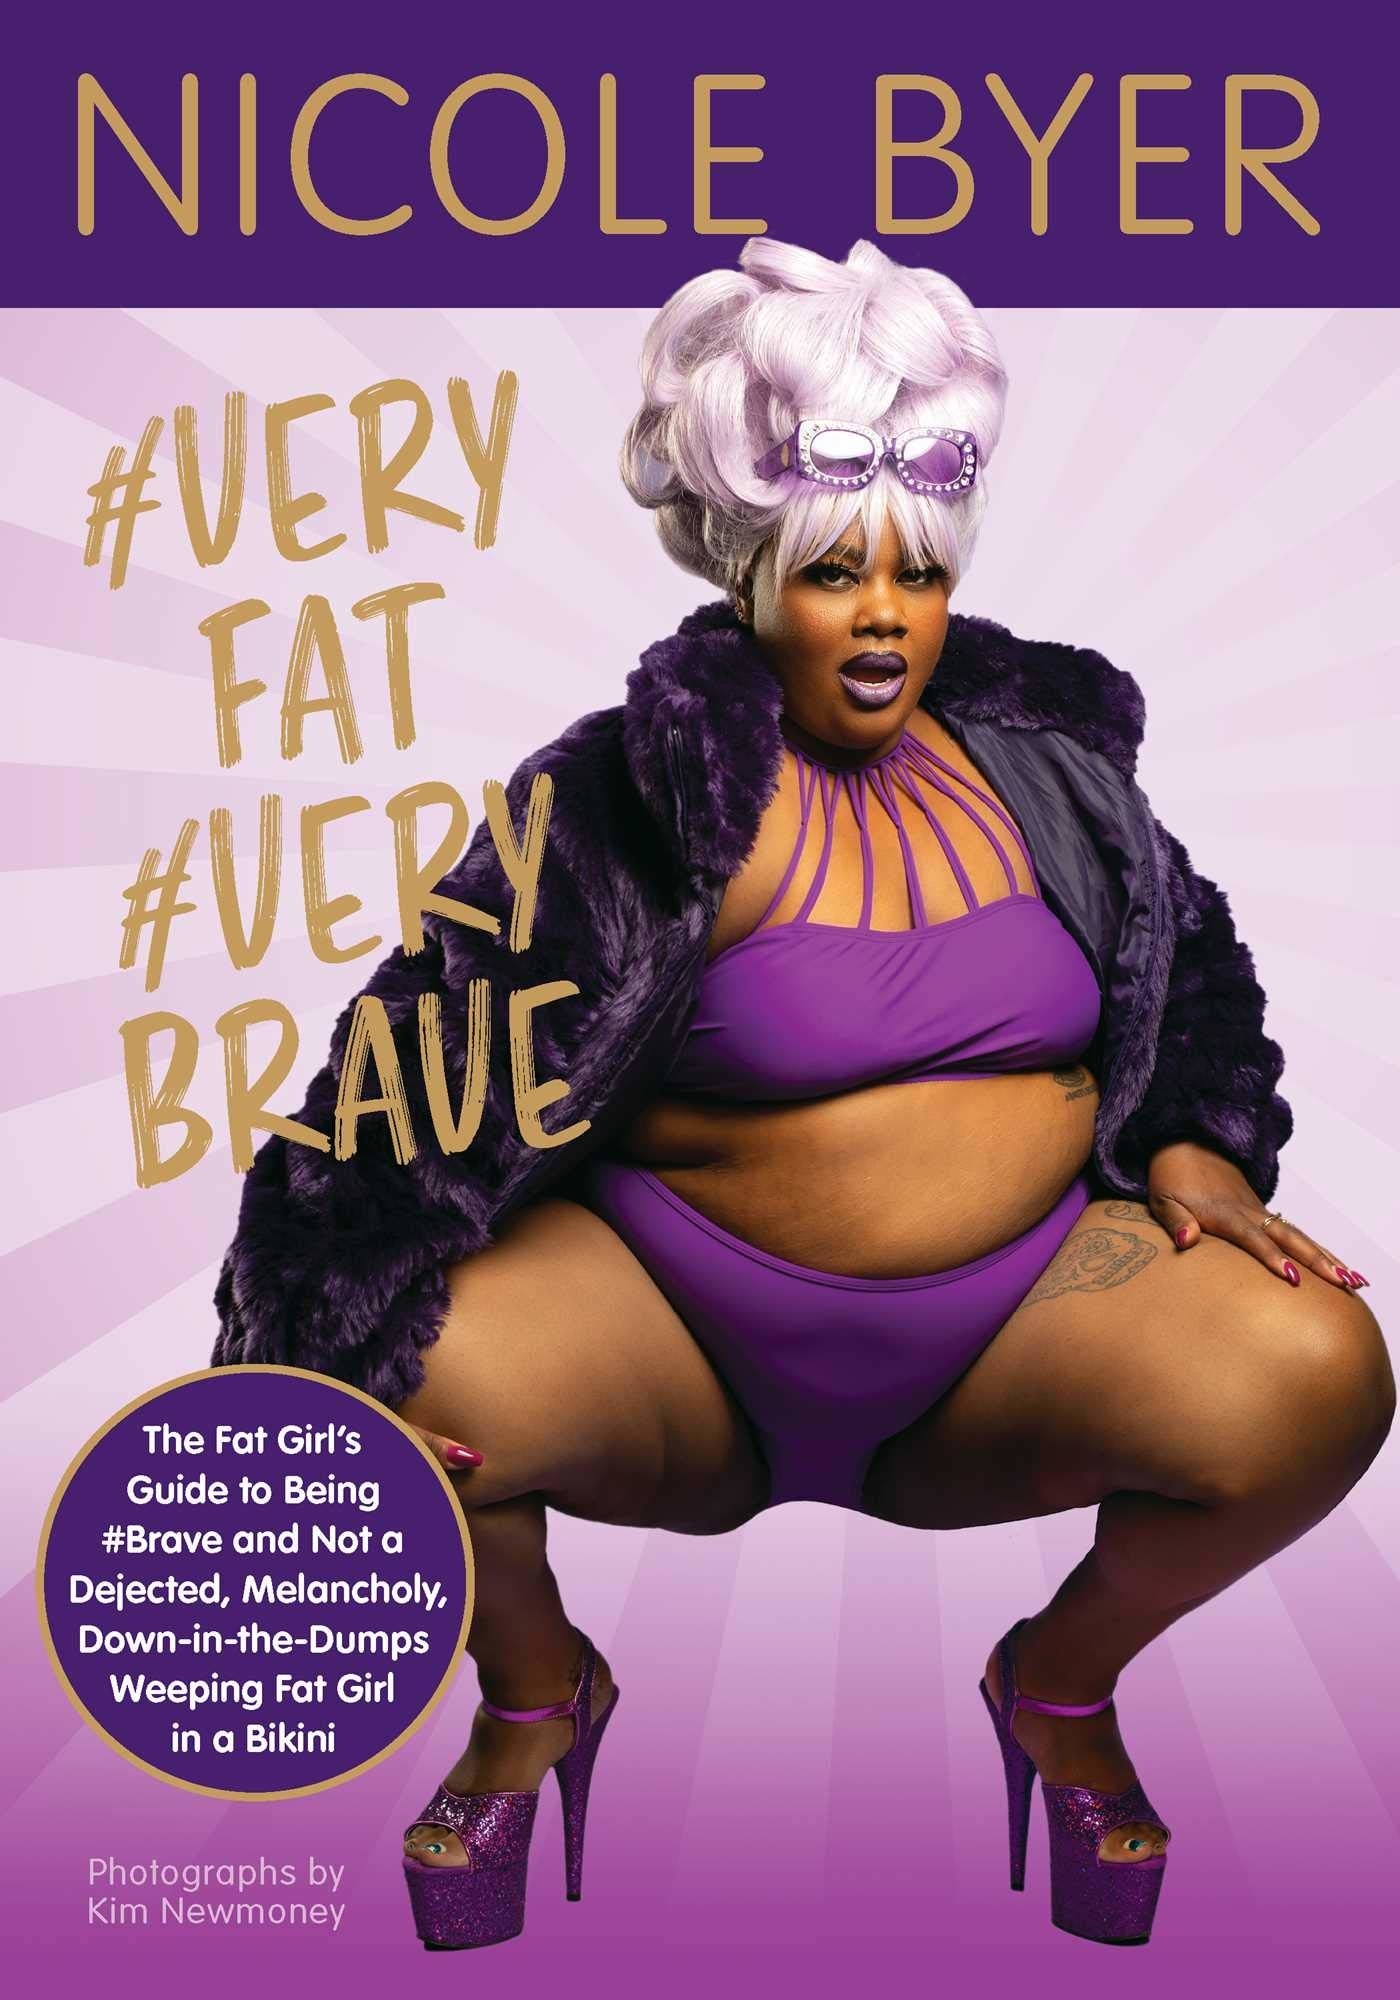 The cover of #veryfat #verybrave